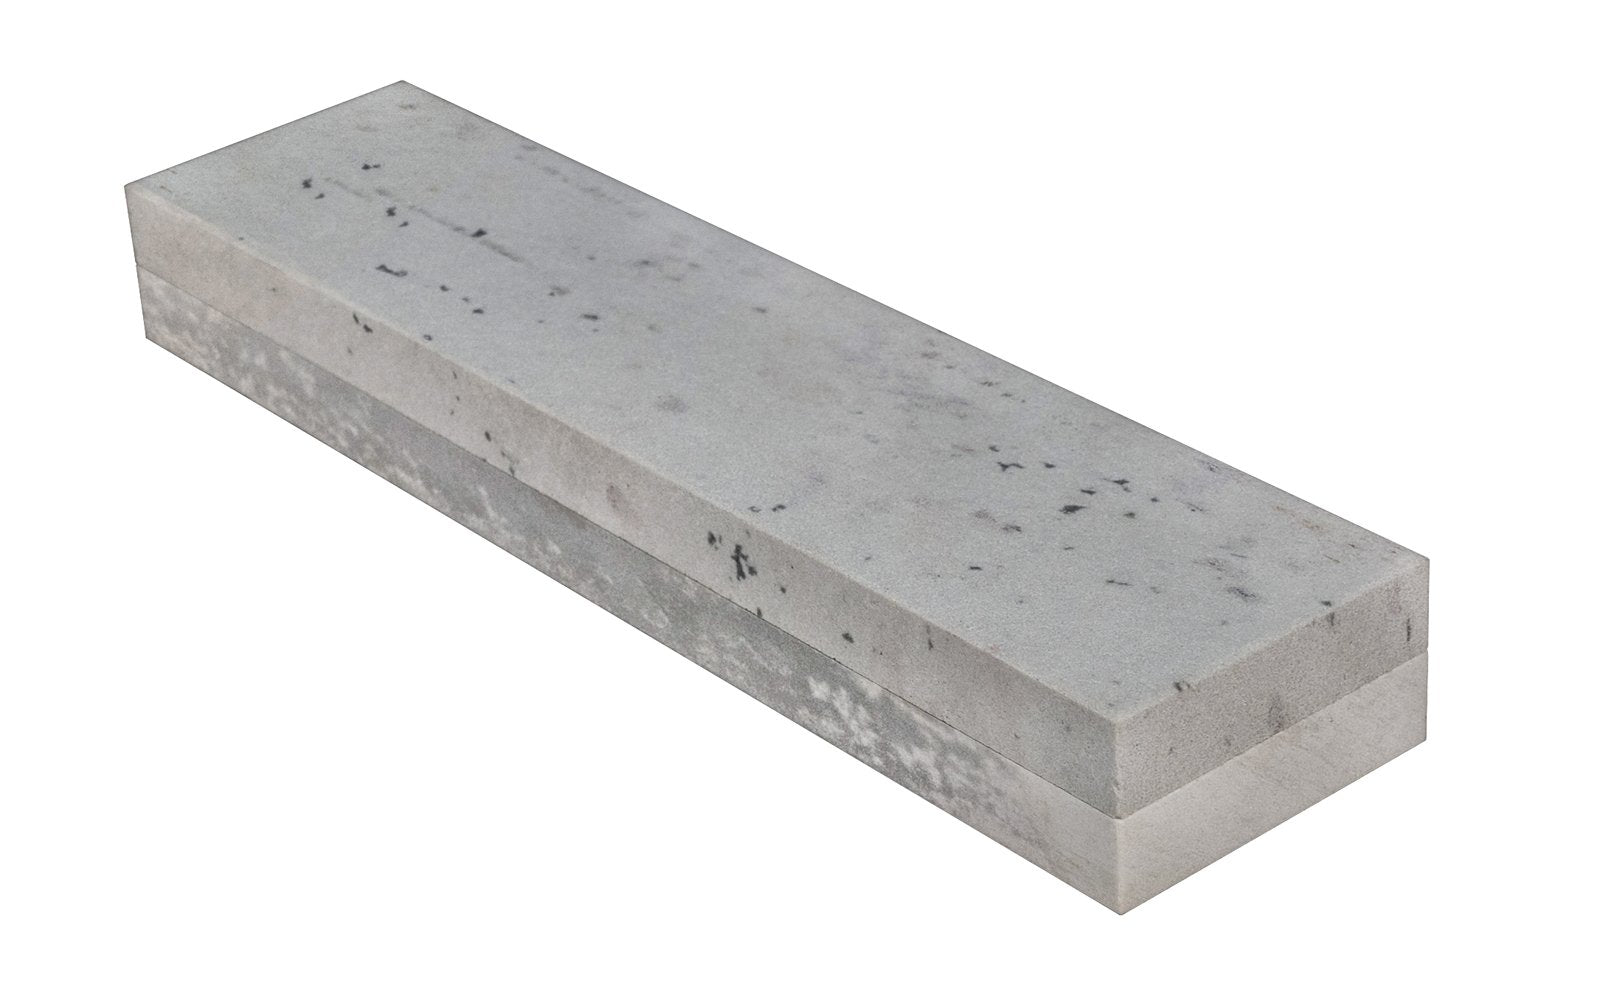 Soft/Hard Combination Arkansas Bench Stone with Wooden Box ~ 8" x 2" x 1" - Made in USA ~ Combo Hard & Soft Arkansas Stone Kit - Soft Arkansas: Extra-fine stone is good for starting an edge on tools - Hard Arkansas: Super-fine stone that is satisfactory for the final edge - Model No. MFC-8-C 